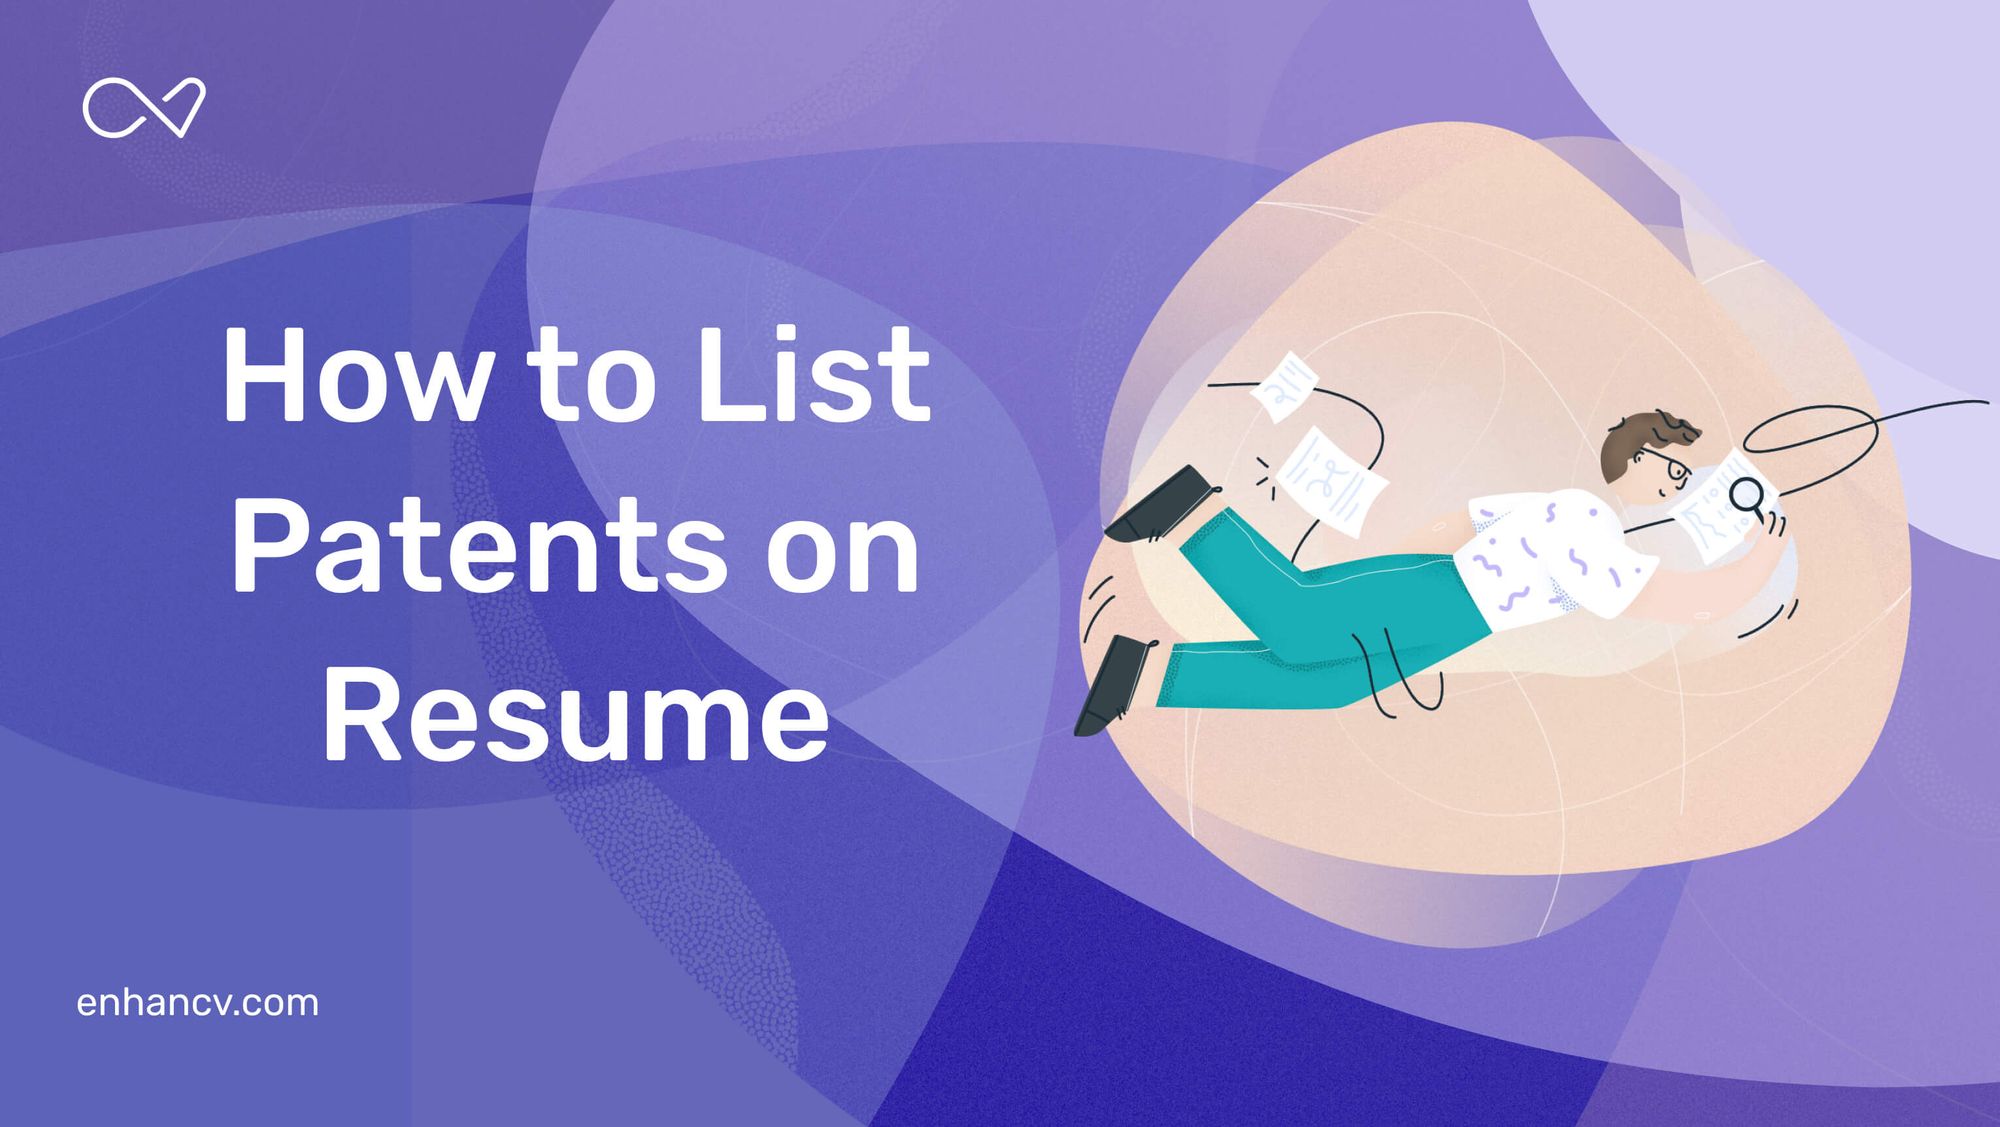 How to List Patent on Resume